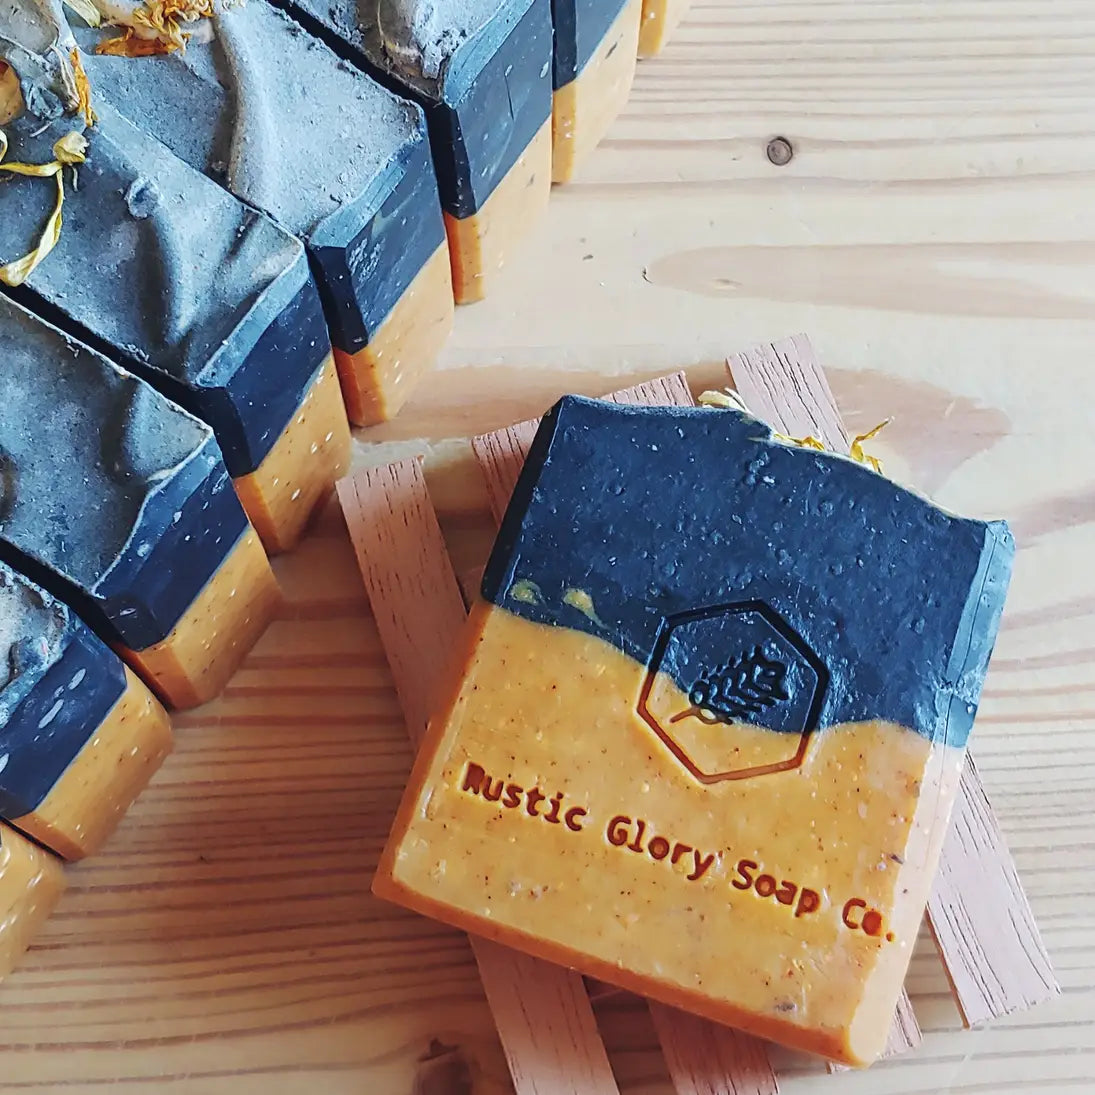 Activated Charcoal & Turmeric Soap Bar By Rustic Glory Soap Co